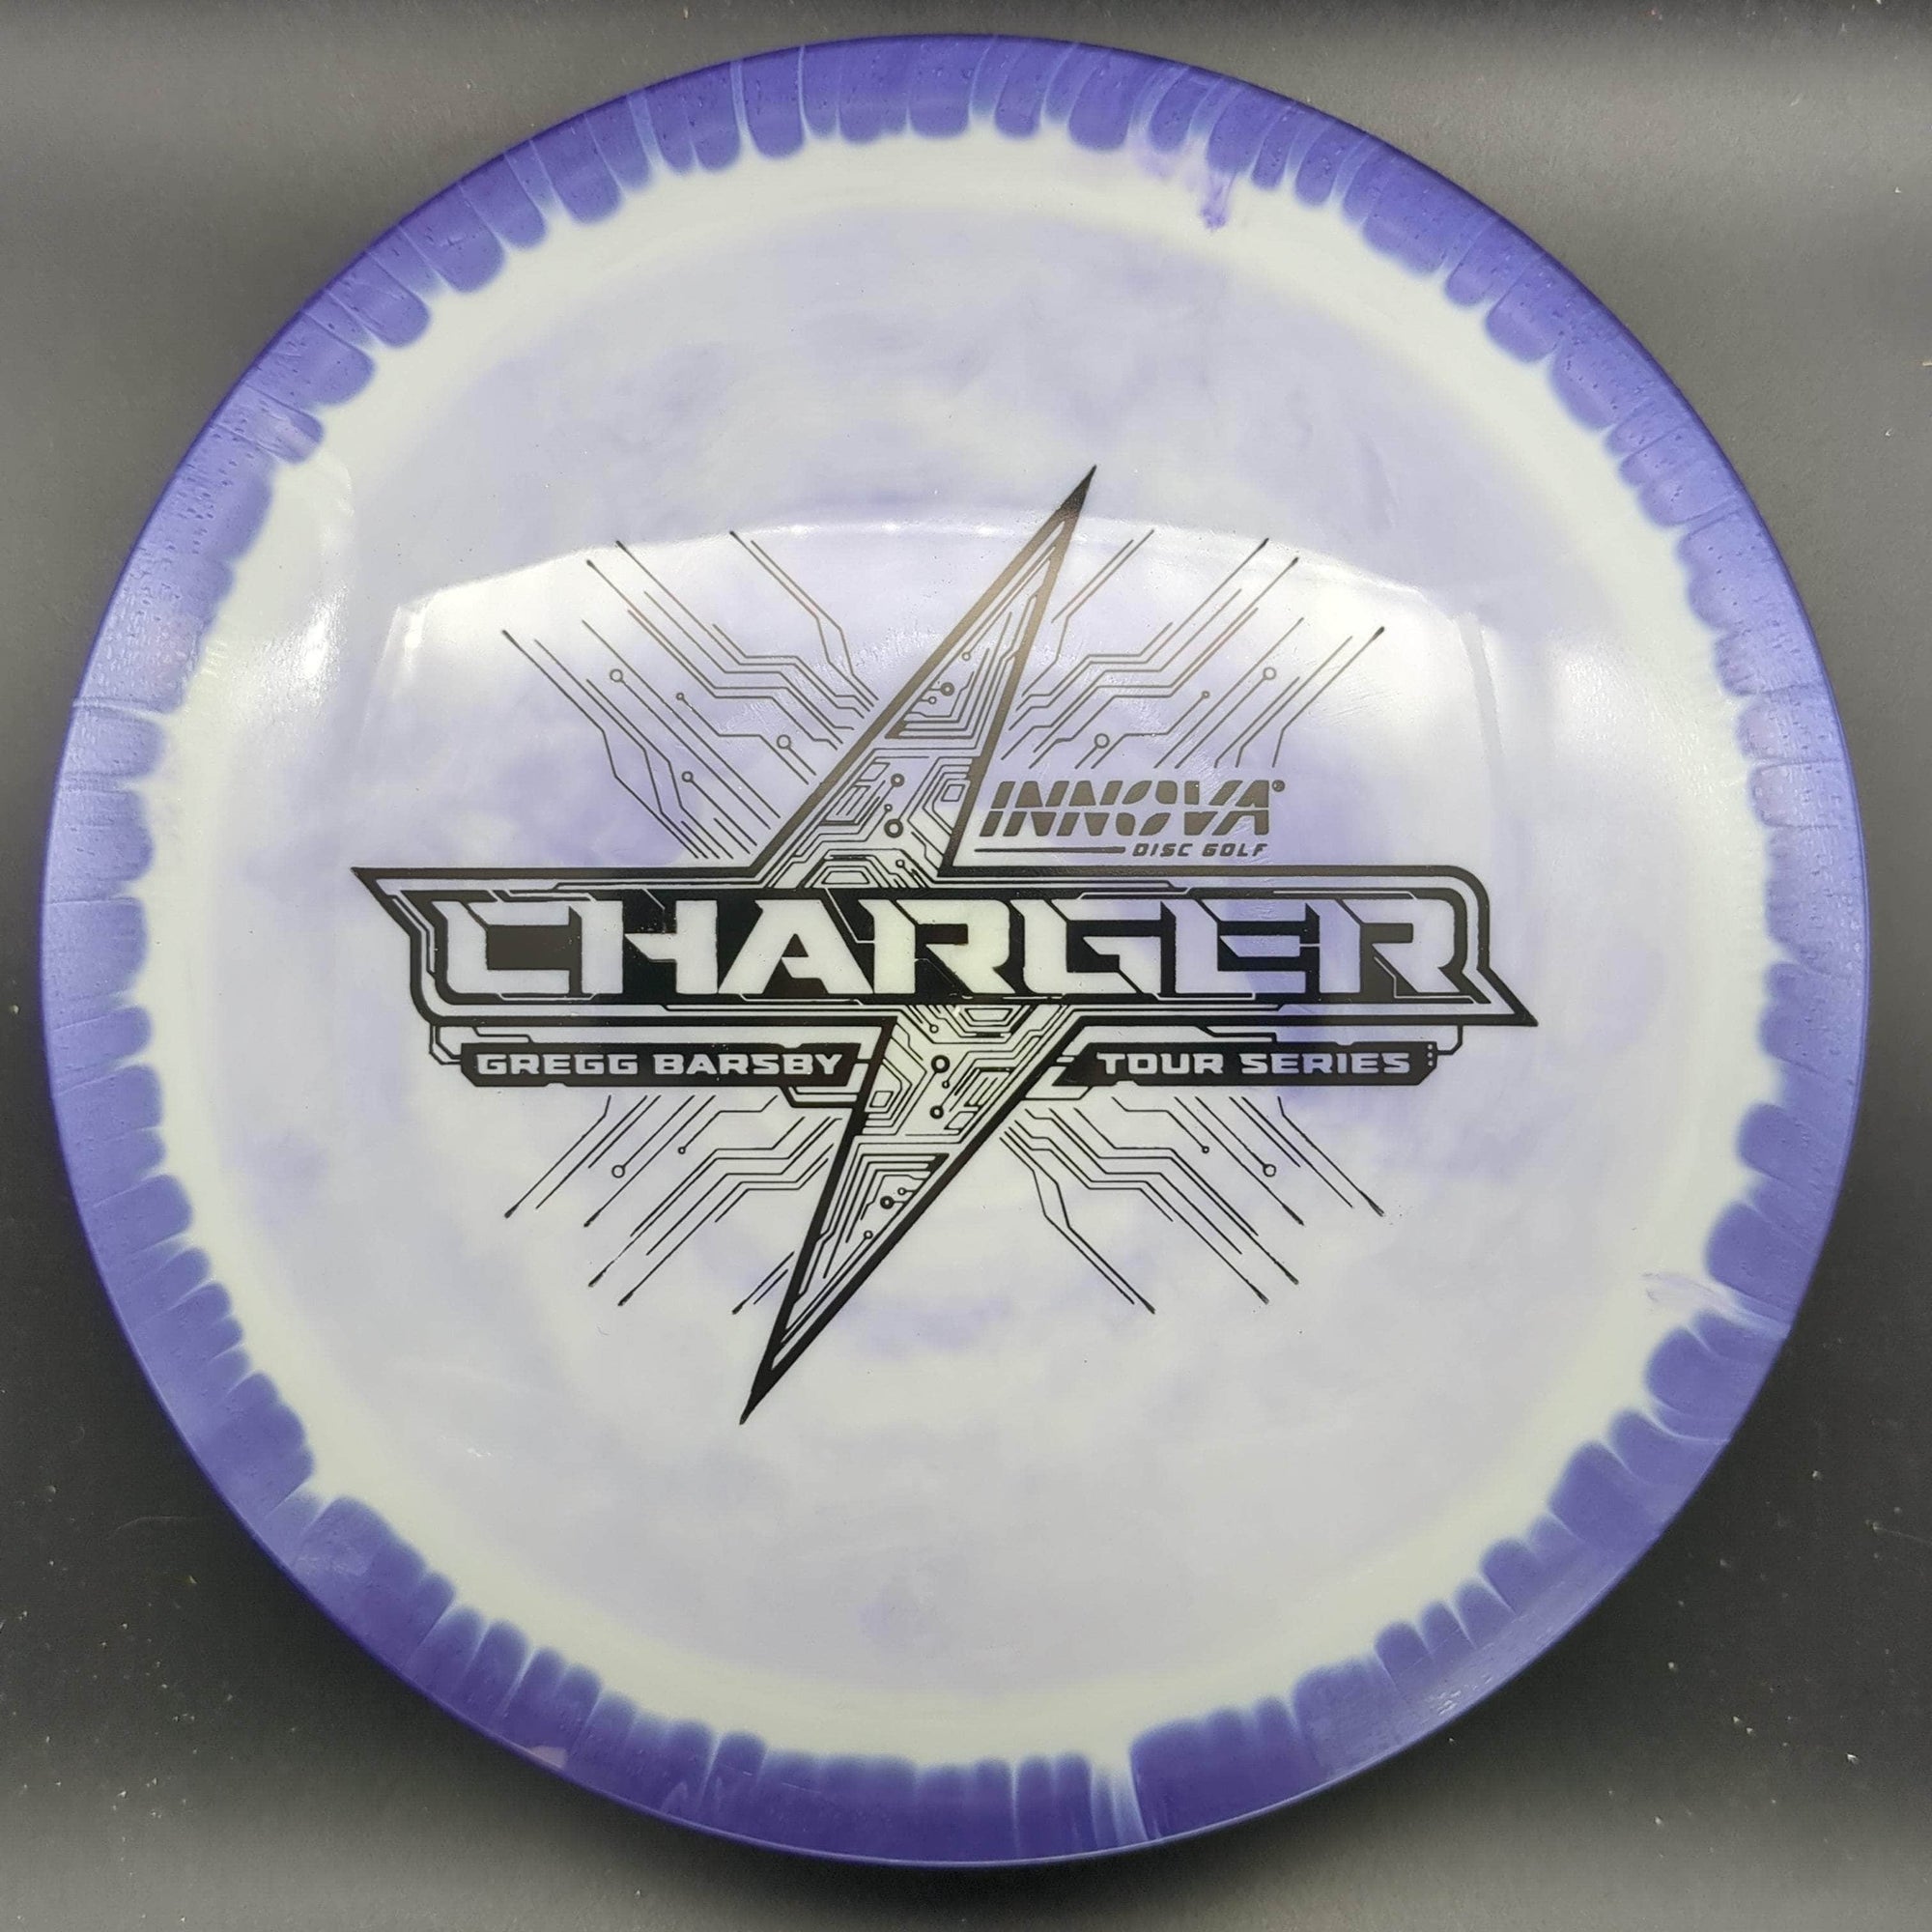 Innova Distance Driver Purple Black 175g Charger, Halo Star, Gregg Barsby Tour Series